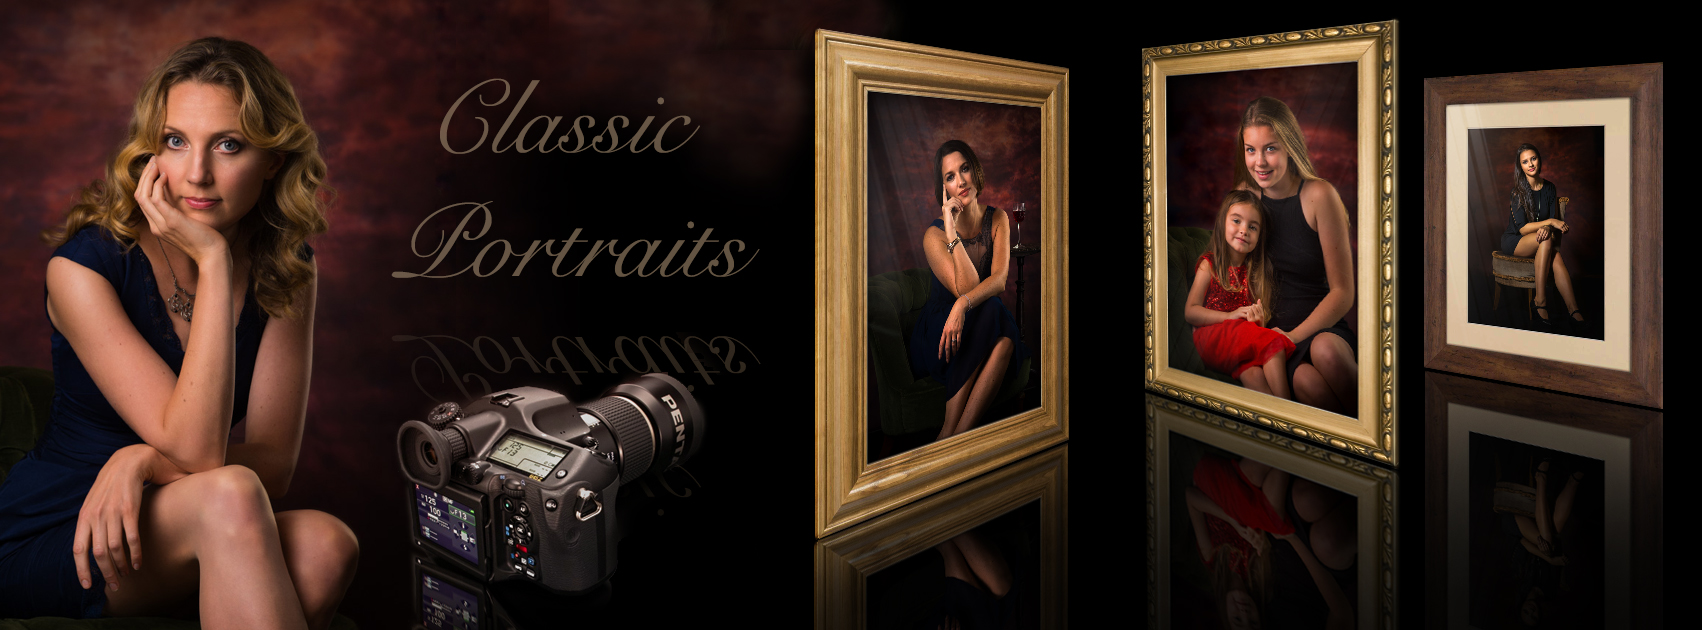 f_classic-portraits-cover-with-cam